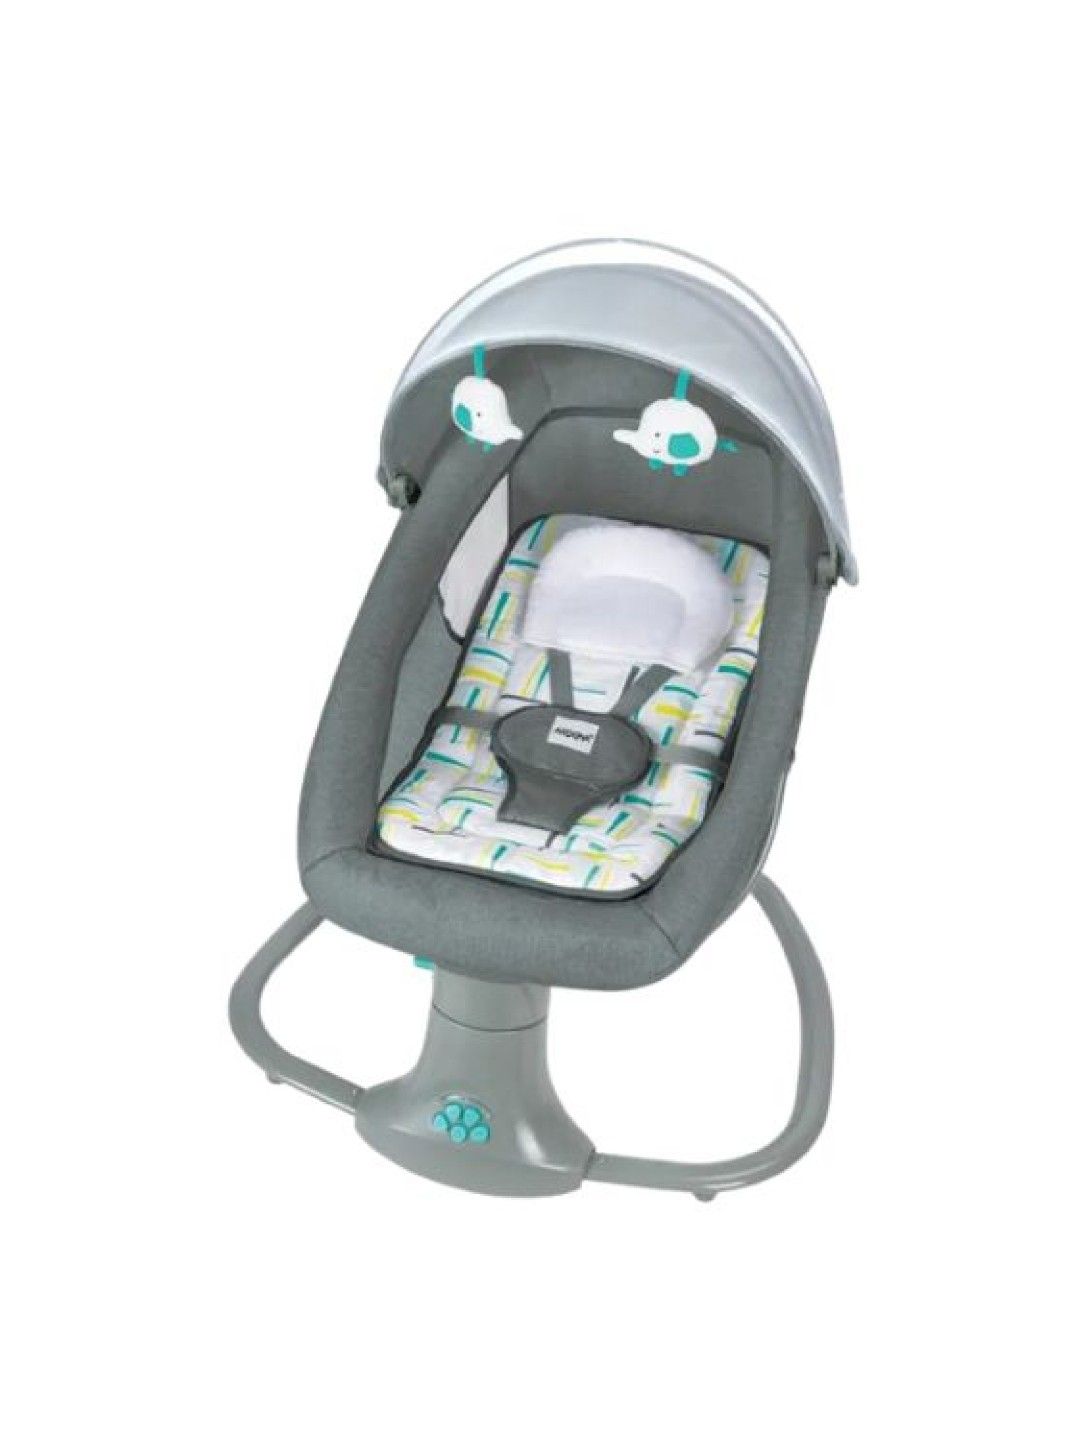 Akeeva Newborn to Toddler Reclinable Automatic Snoozer Swing (SNUGGLI)